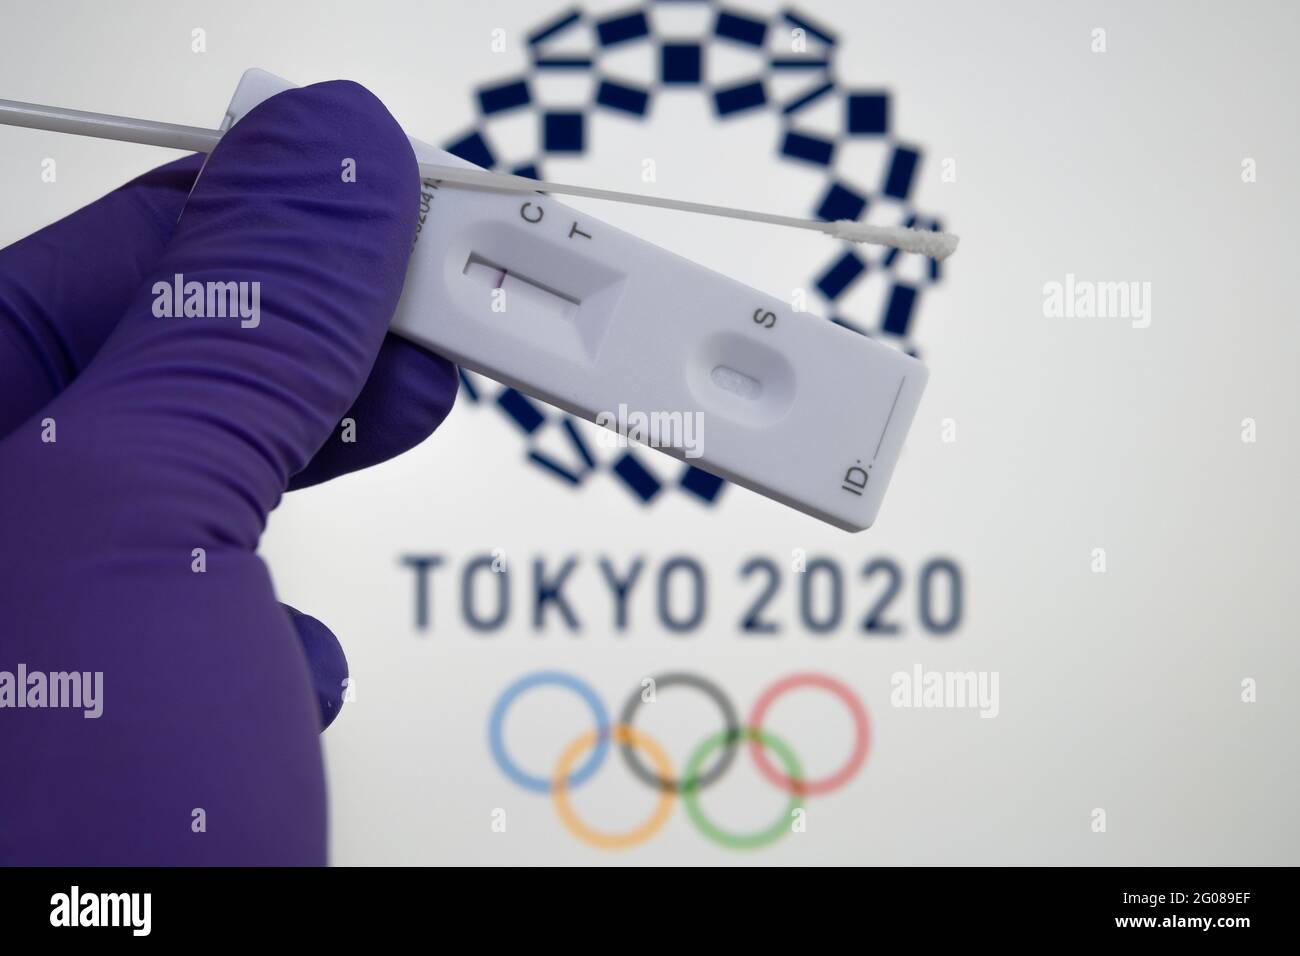 Negative PCR test in front and blurred Tokyo 2020 logo on the blurred background. Concept for Tokyo COVID Olympic games in 2021. Stafford, United King Stock Photo